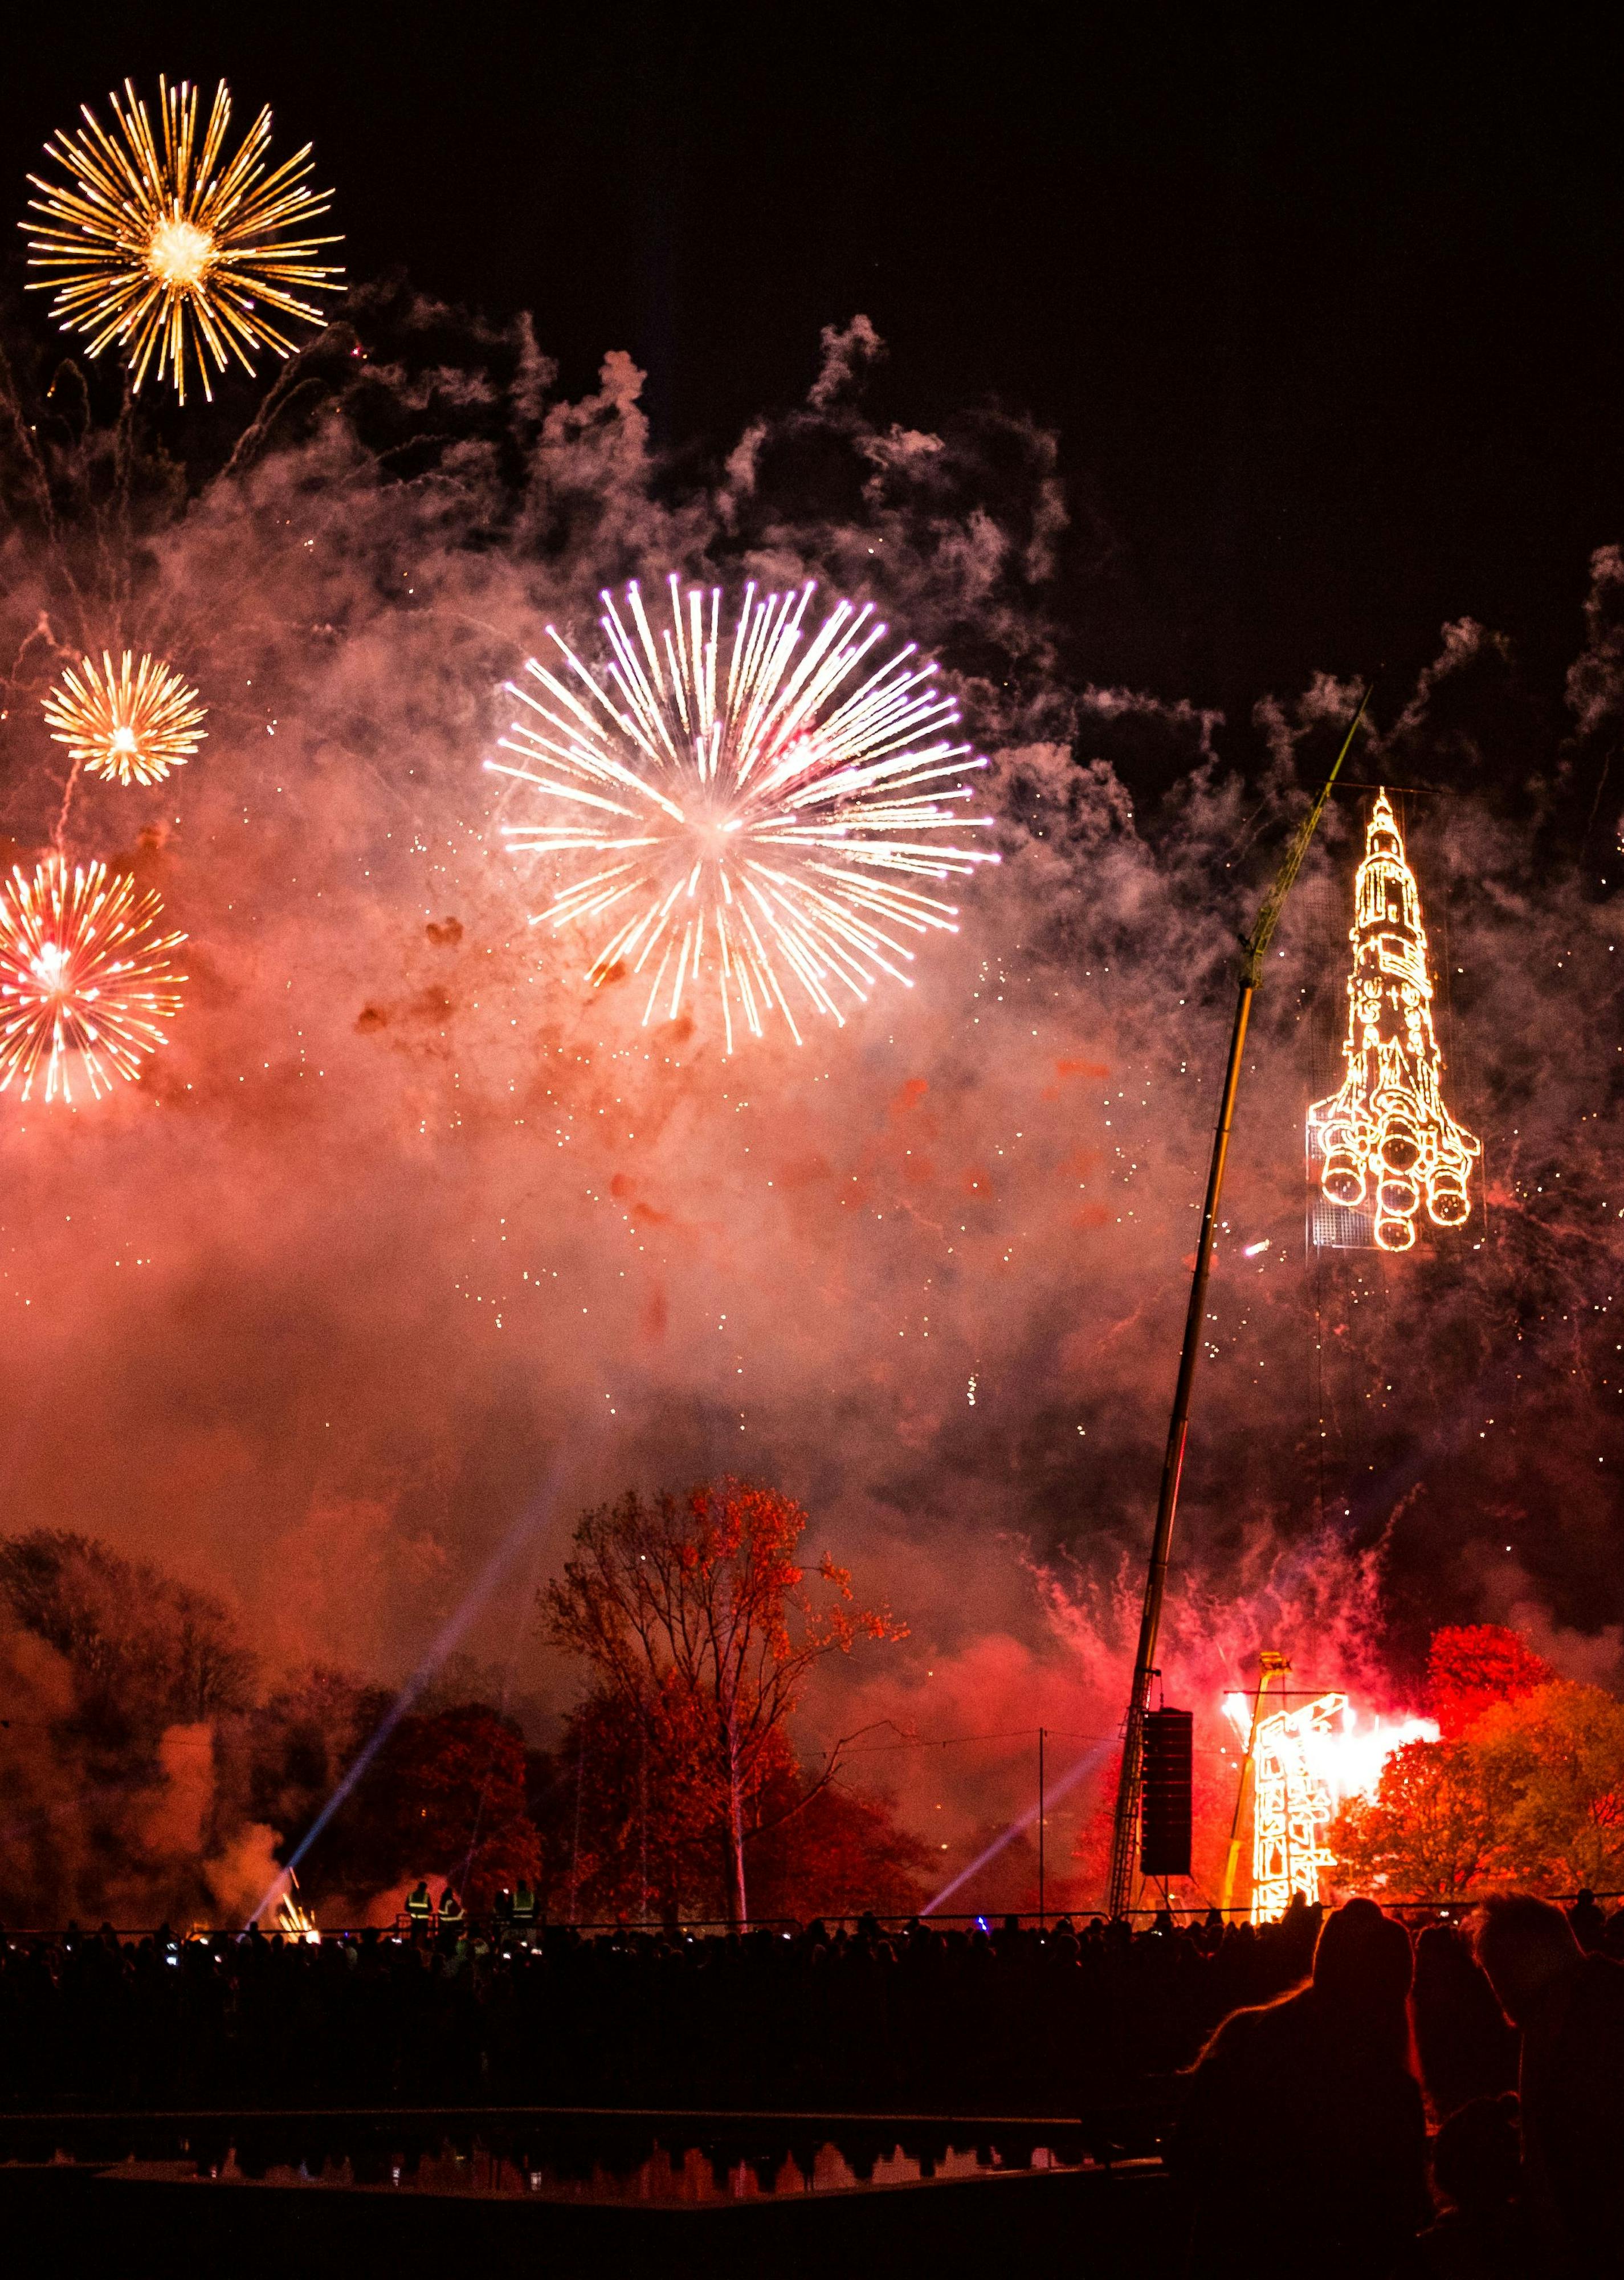 A night sky full of red fireworks and the lit-up image of a rocket